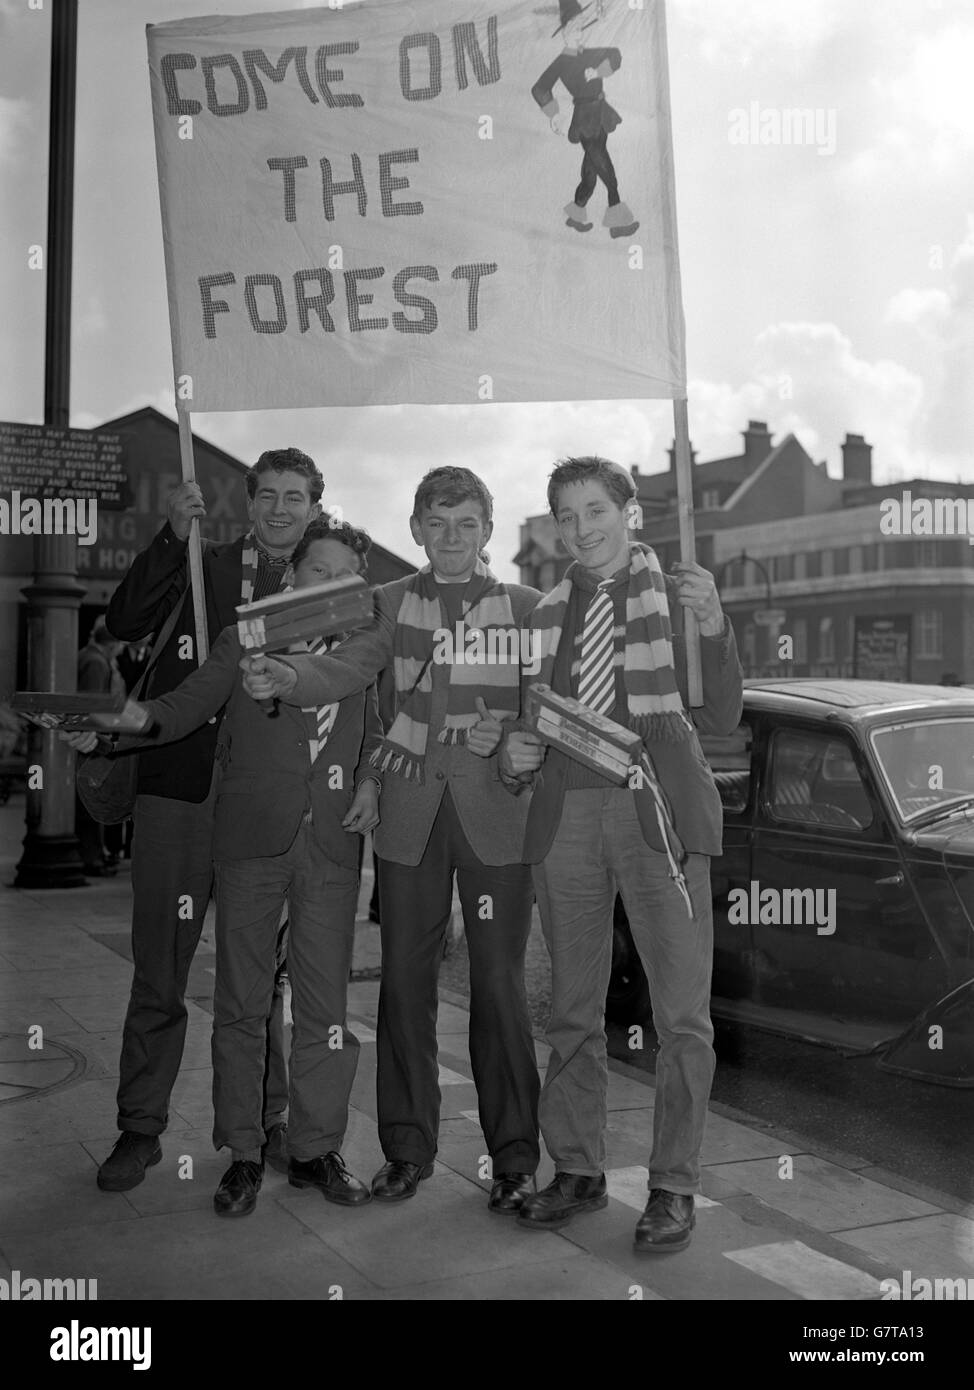 Proclaiming their allegiance with a large banner are these supporters of Nottingham Forest, pictured after their arrival at St Pancras Station, London, to see their team play Luton Town in the FA Cup final at Wembley. They are (l-r) Richard Rakowski, Roy Coleman, John Musson and Terry Chambers. Stock Photo